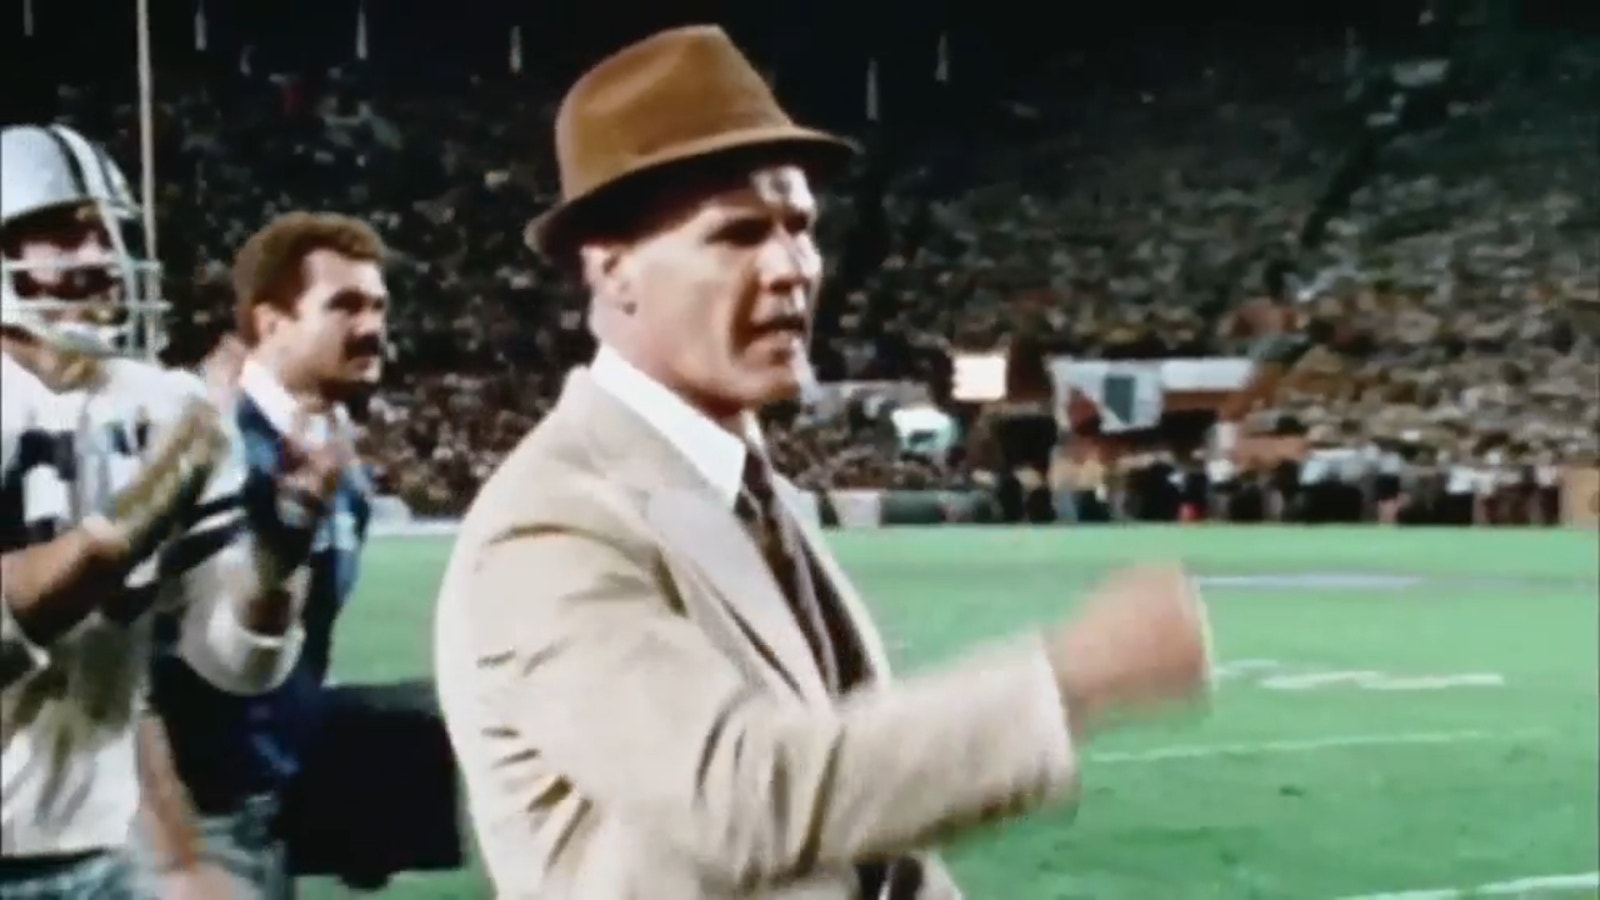 Honoring Tom Landry's legendary career with the Dallas Cowboys this Veterans Day